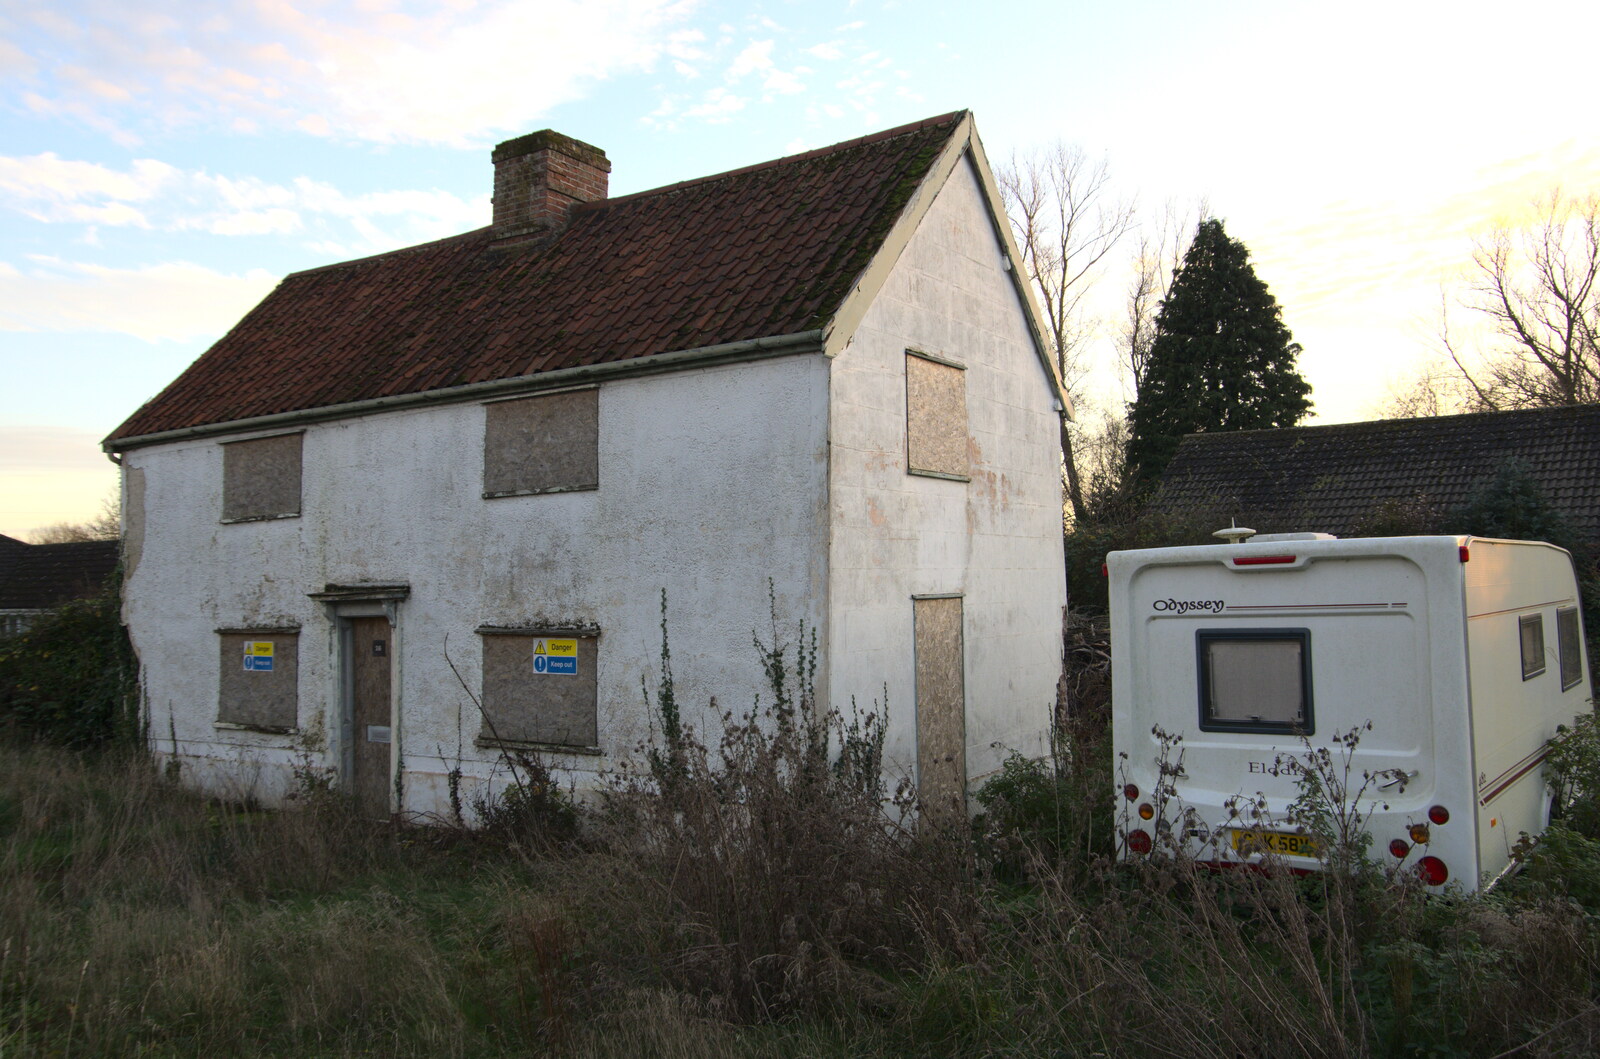 No progress has been made on the derelict house from The Dereliction of Eye, Suffolk - 22nd November 2020